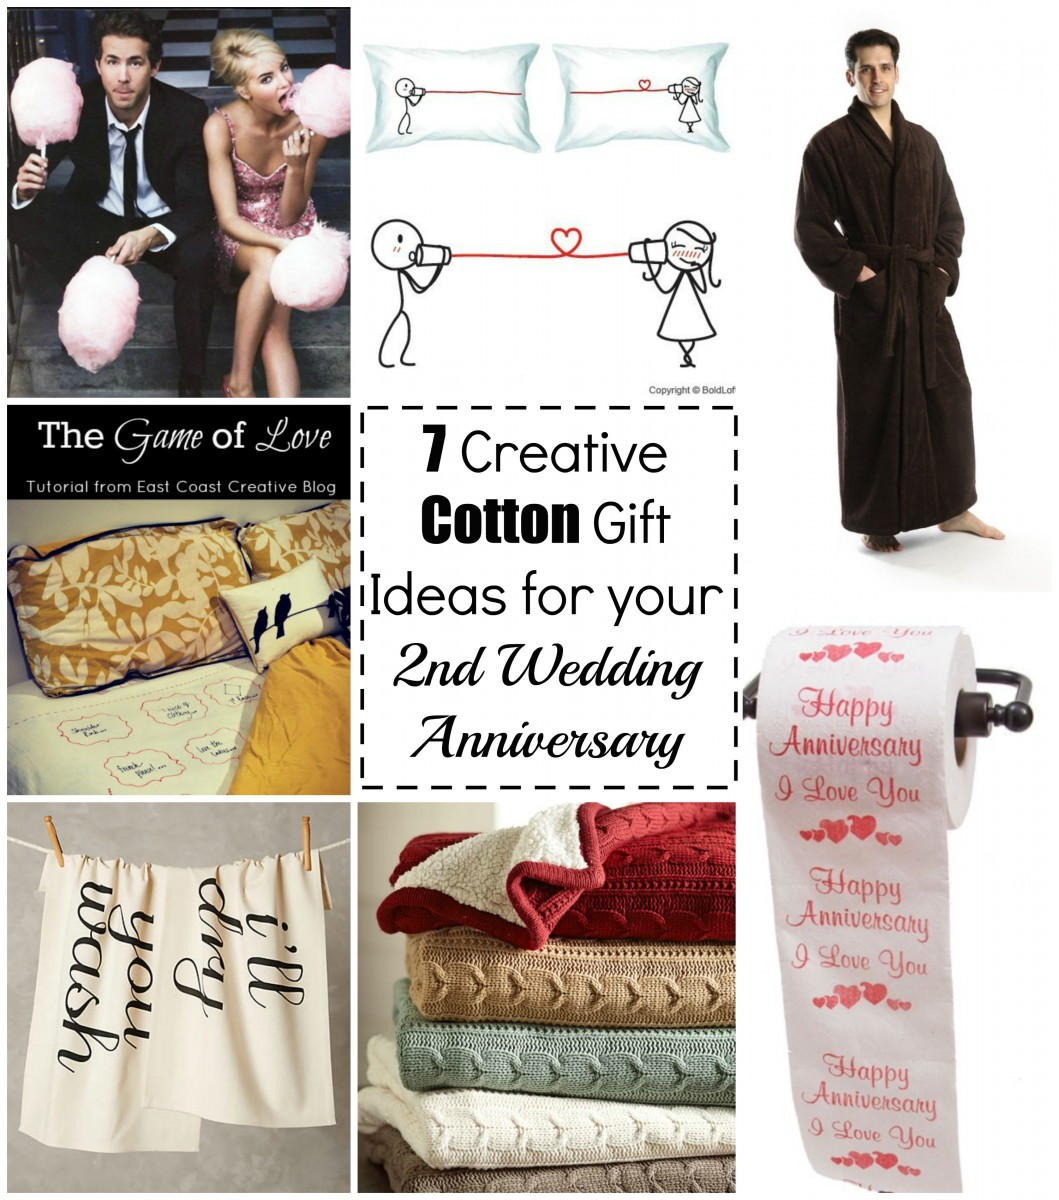 Second Anniversary Cotton Gift Ideas
 7 Cotton Gift Ideas for your 2nd Wedding Anniversary